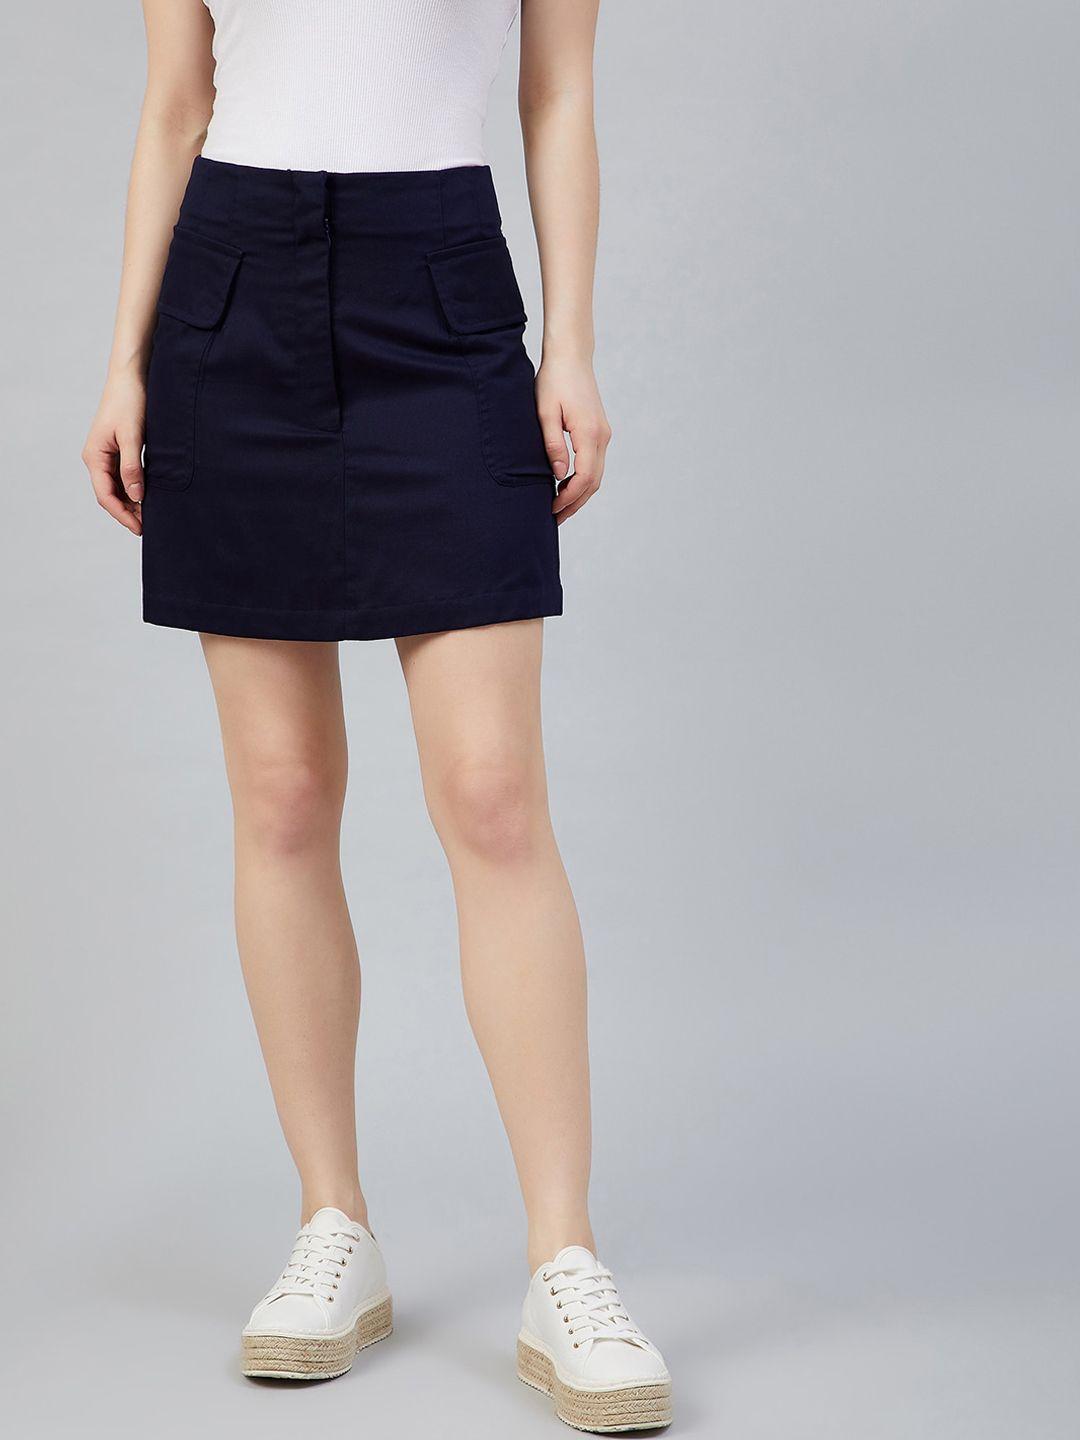 Marie Claire Women Navy Blue Solid Straight Mini Skirt